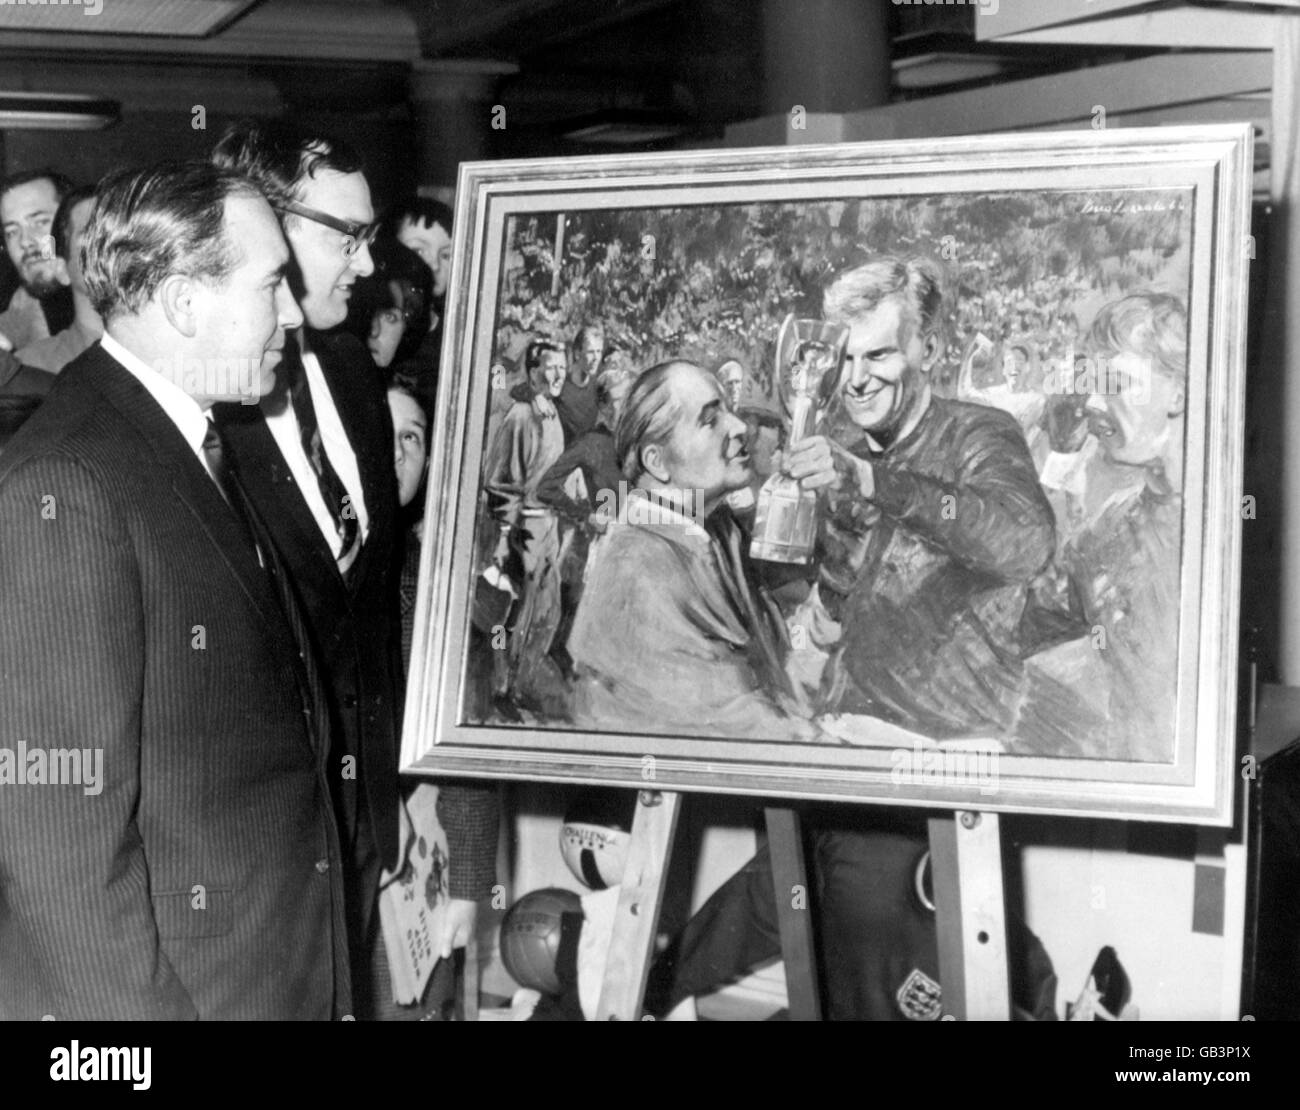 Mr Michael Pitt-Bailey (second l) of Radox presents England manager Sir Alf Ramsey (l) with a painting, by royal portrait artist Vasco Lazzolo, of the moment when England captain Bobby Moore handed the Jules Rimet Trophy to Ramsey after England's World Cup Final victory over West Germany Stock Photo